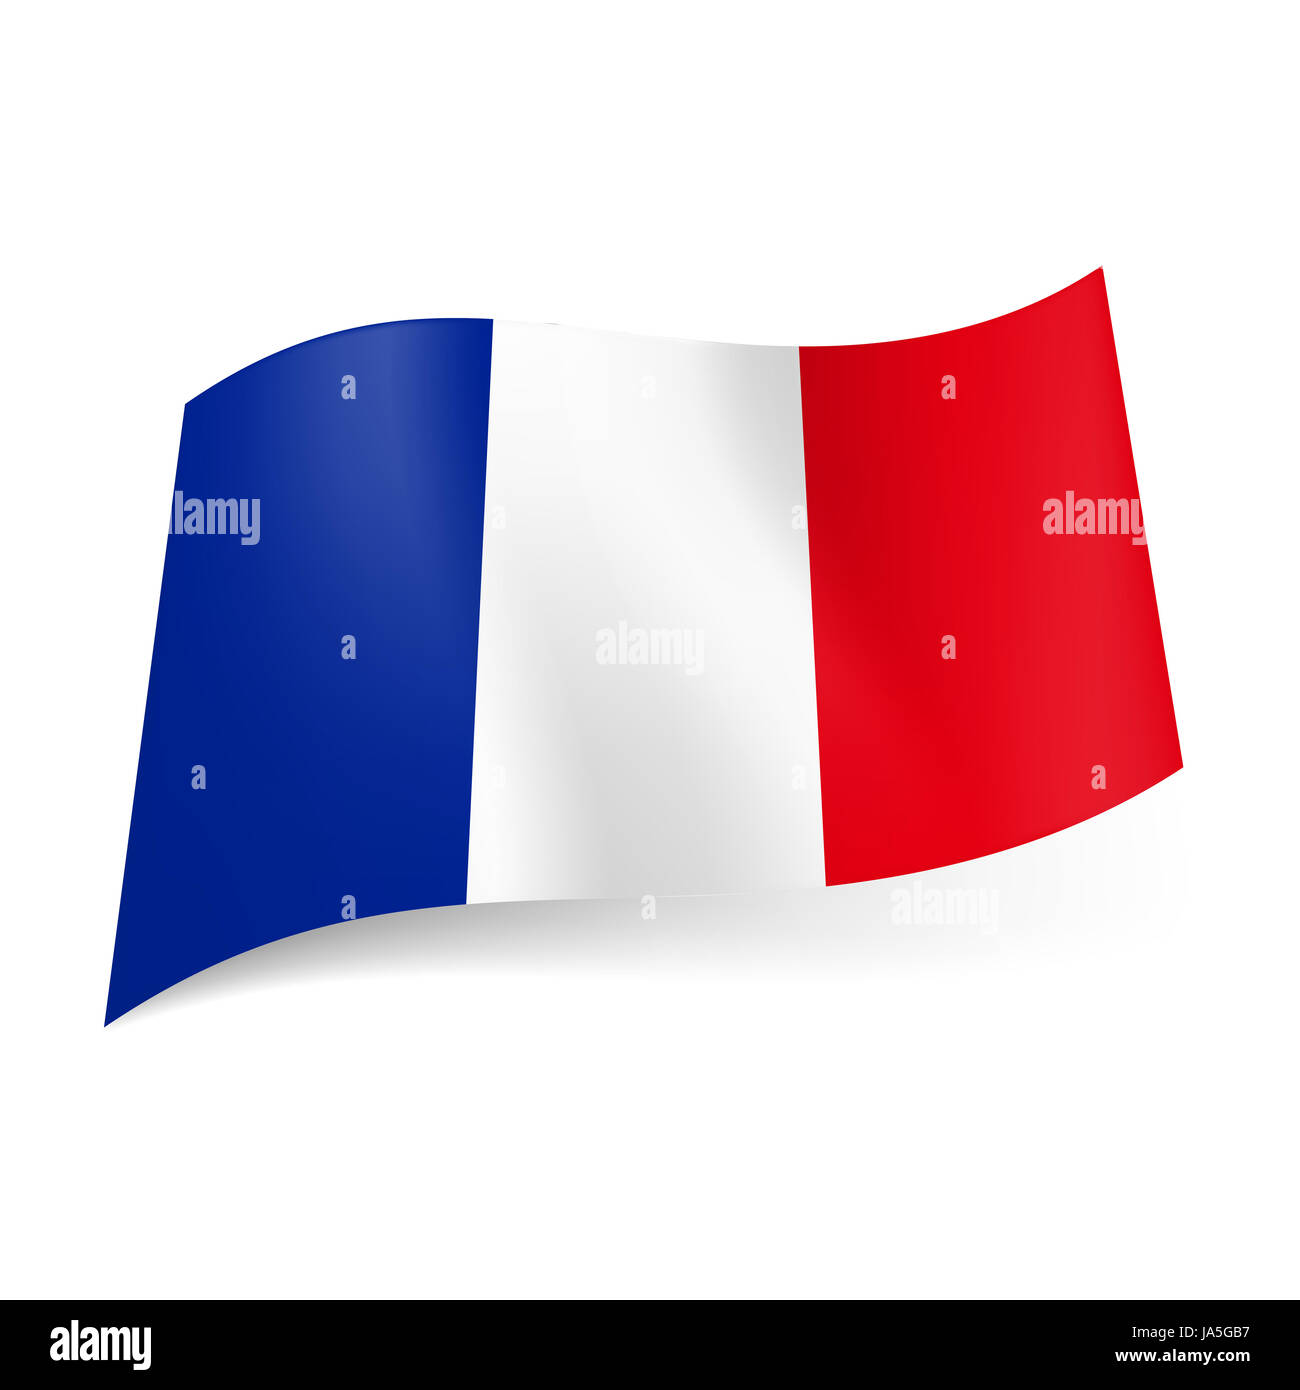 National flag of France: blue, white and red vertical stripes